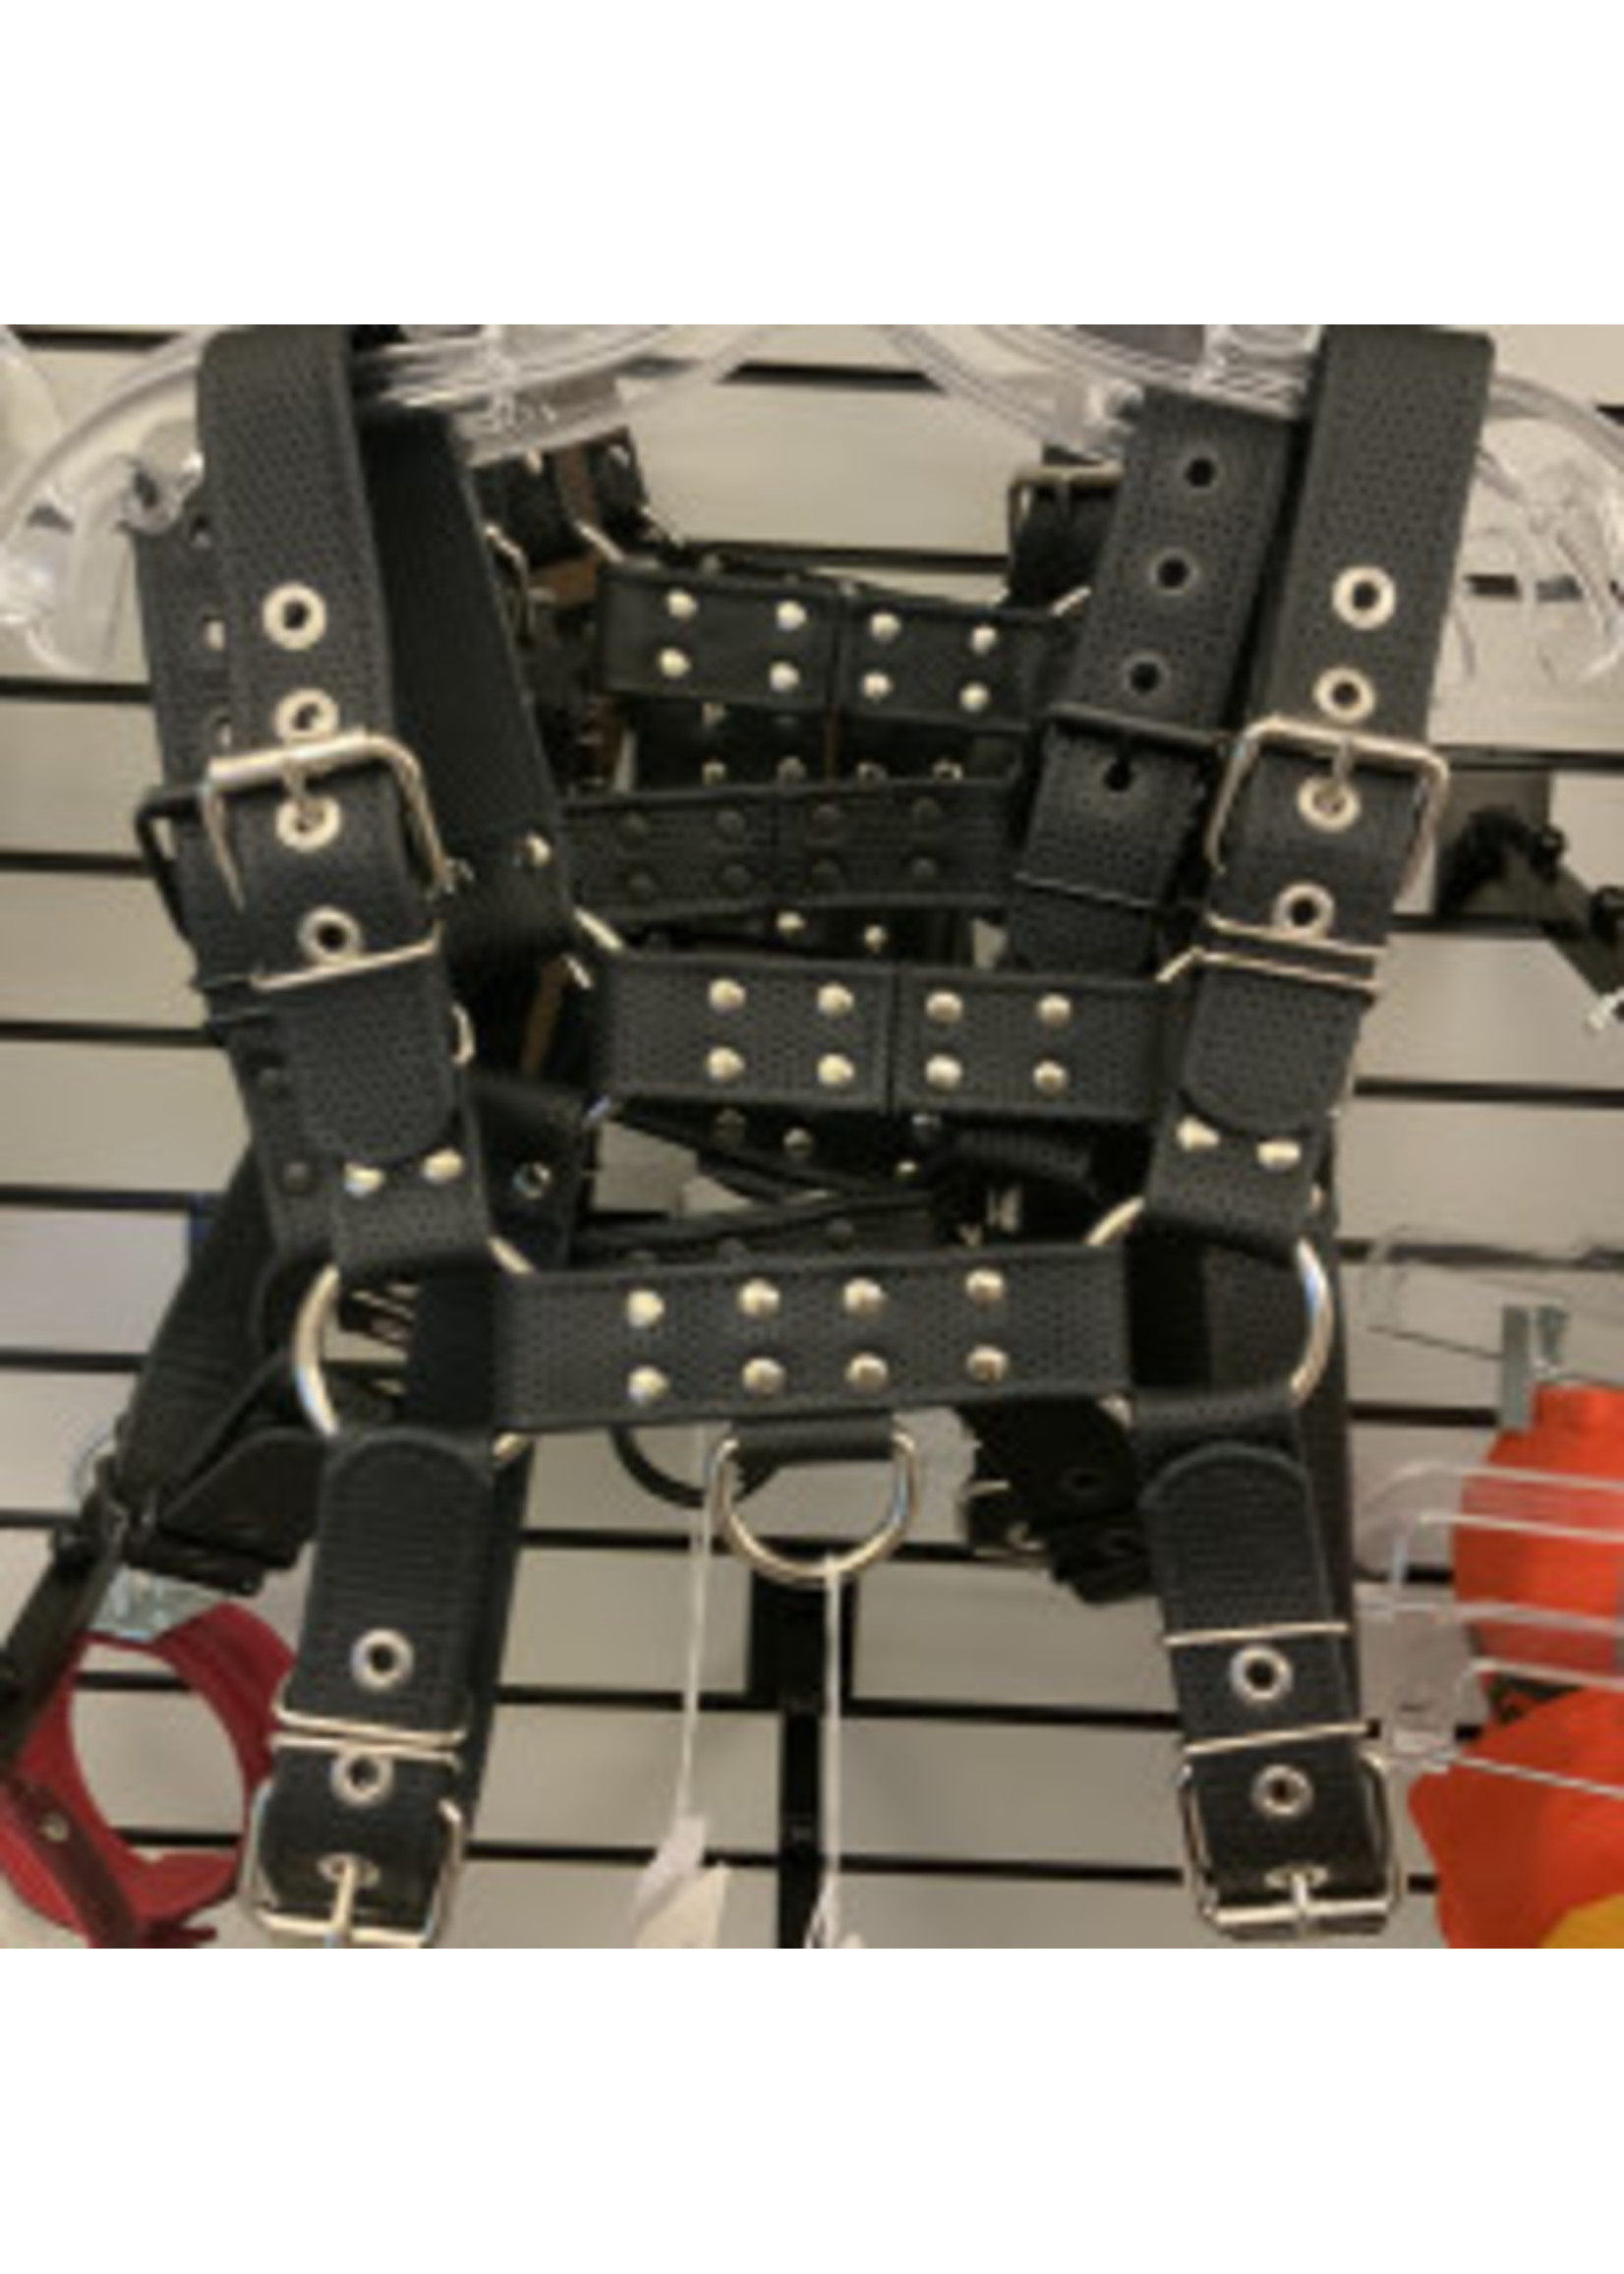 The Leather Union Bull Dog Harness